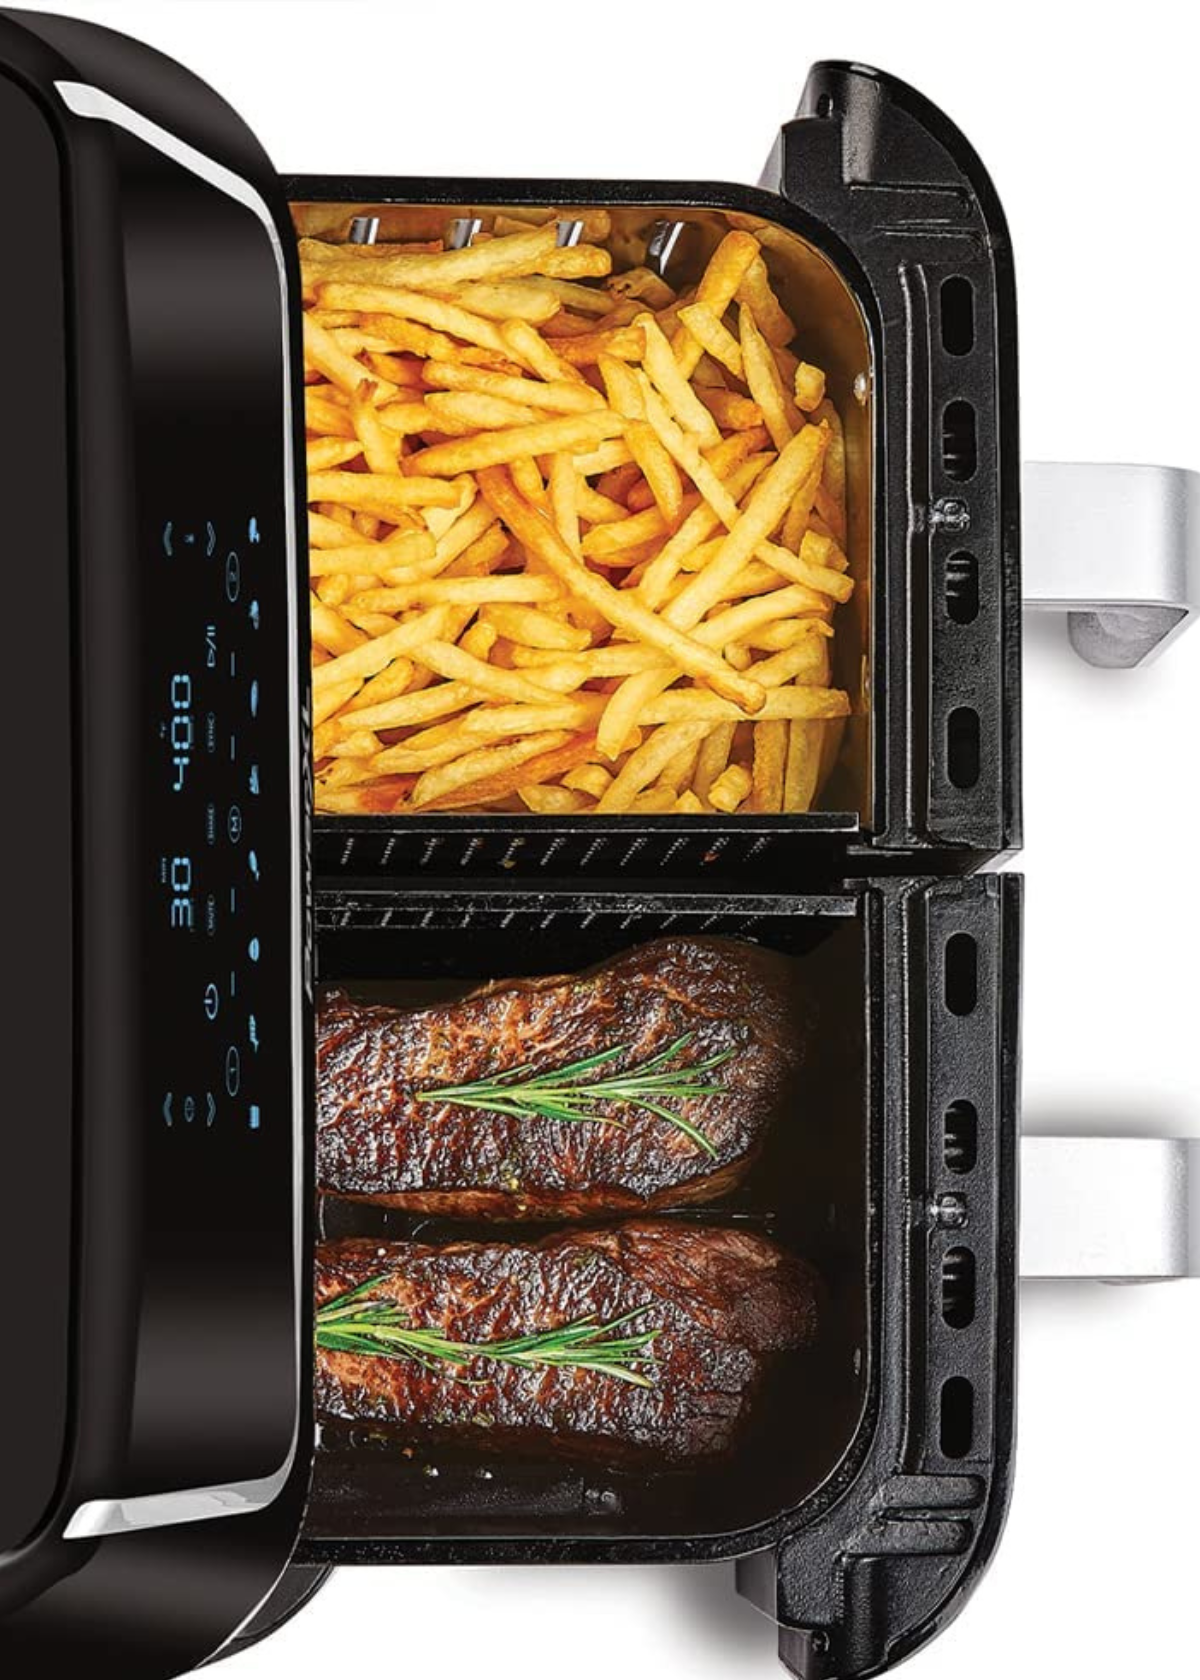 Largest Air Fryer: The Best Way To Feed A Crowd